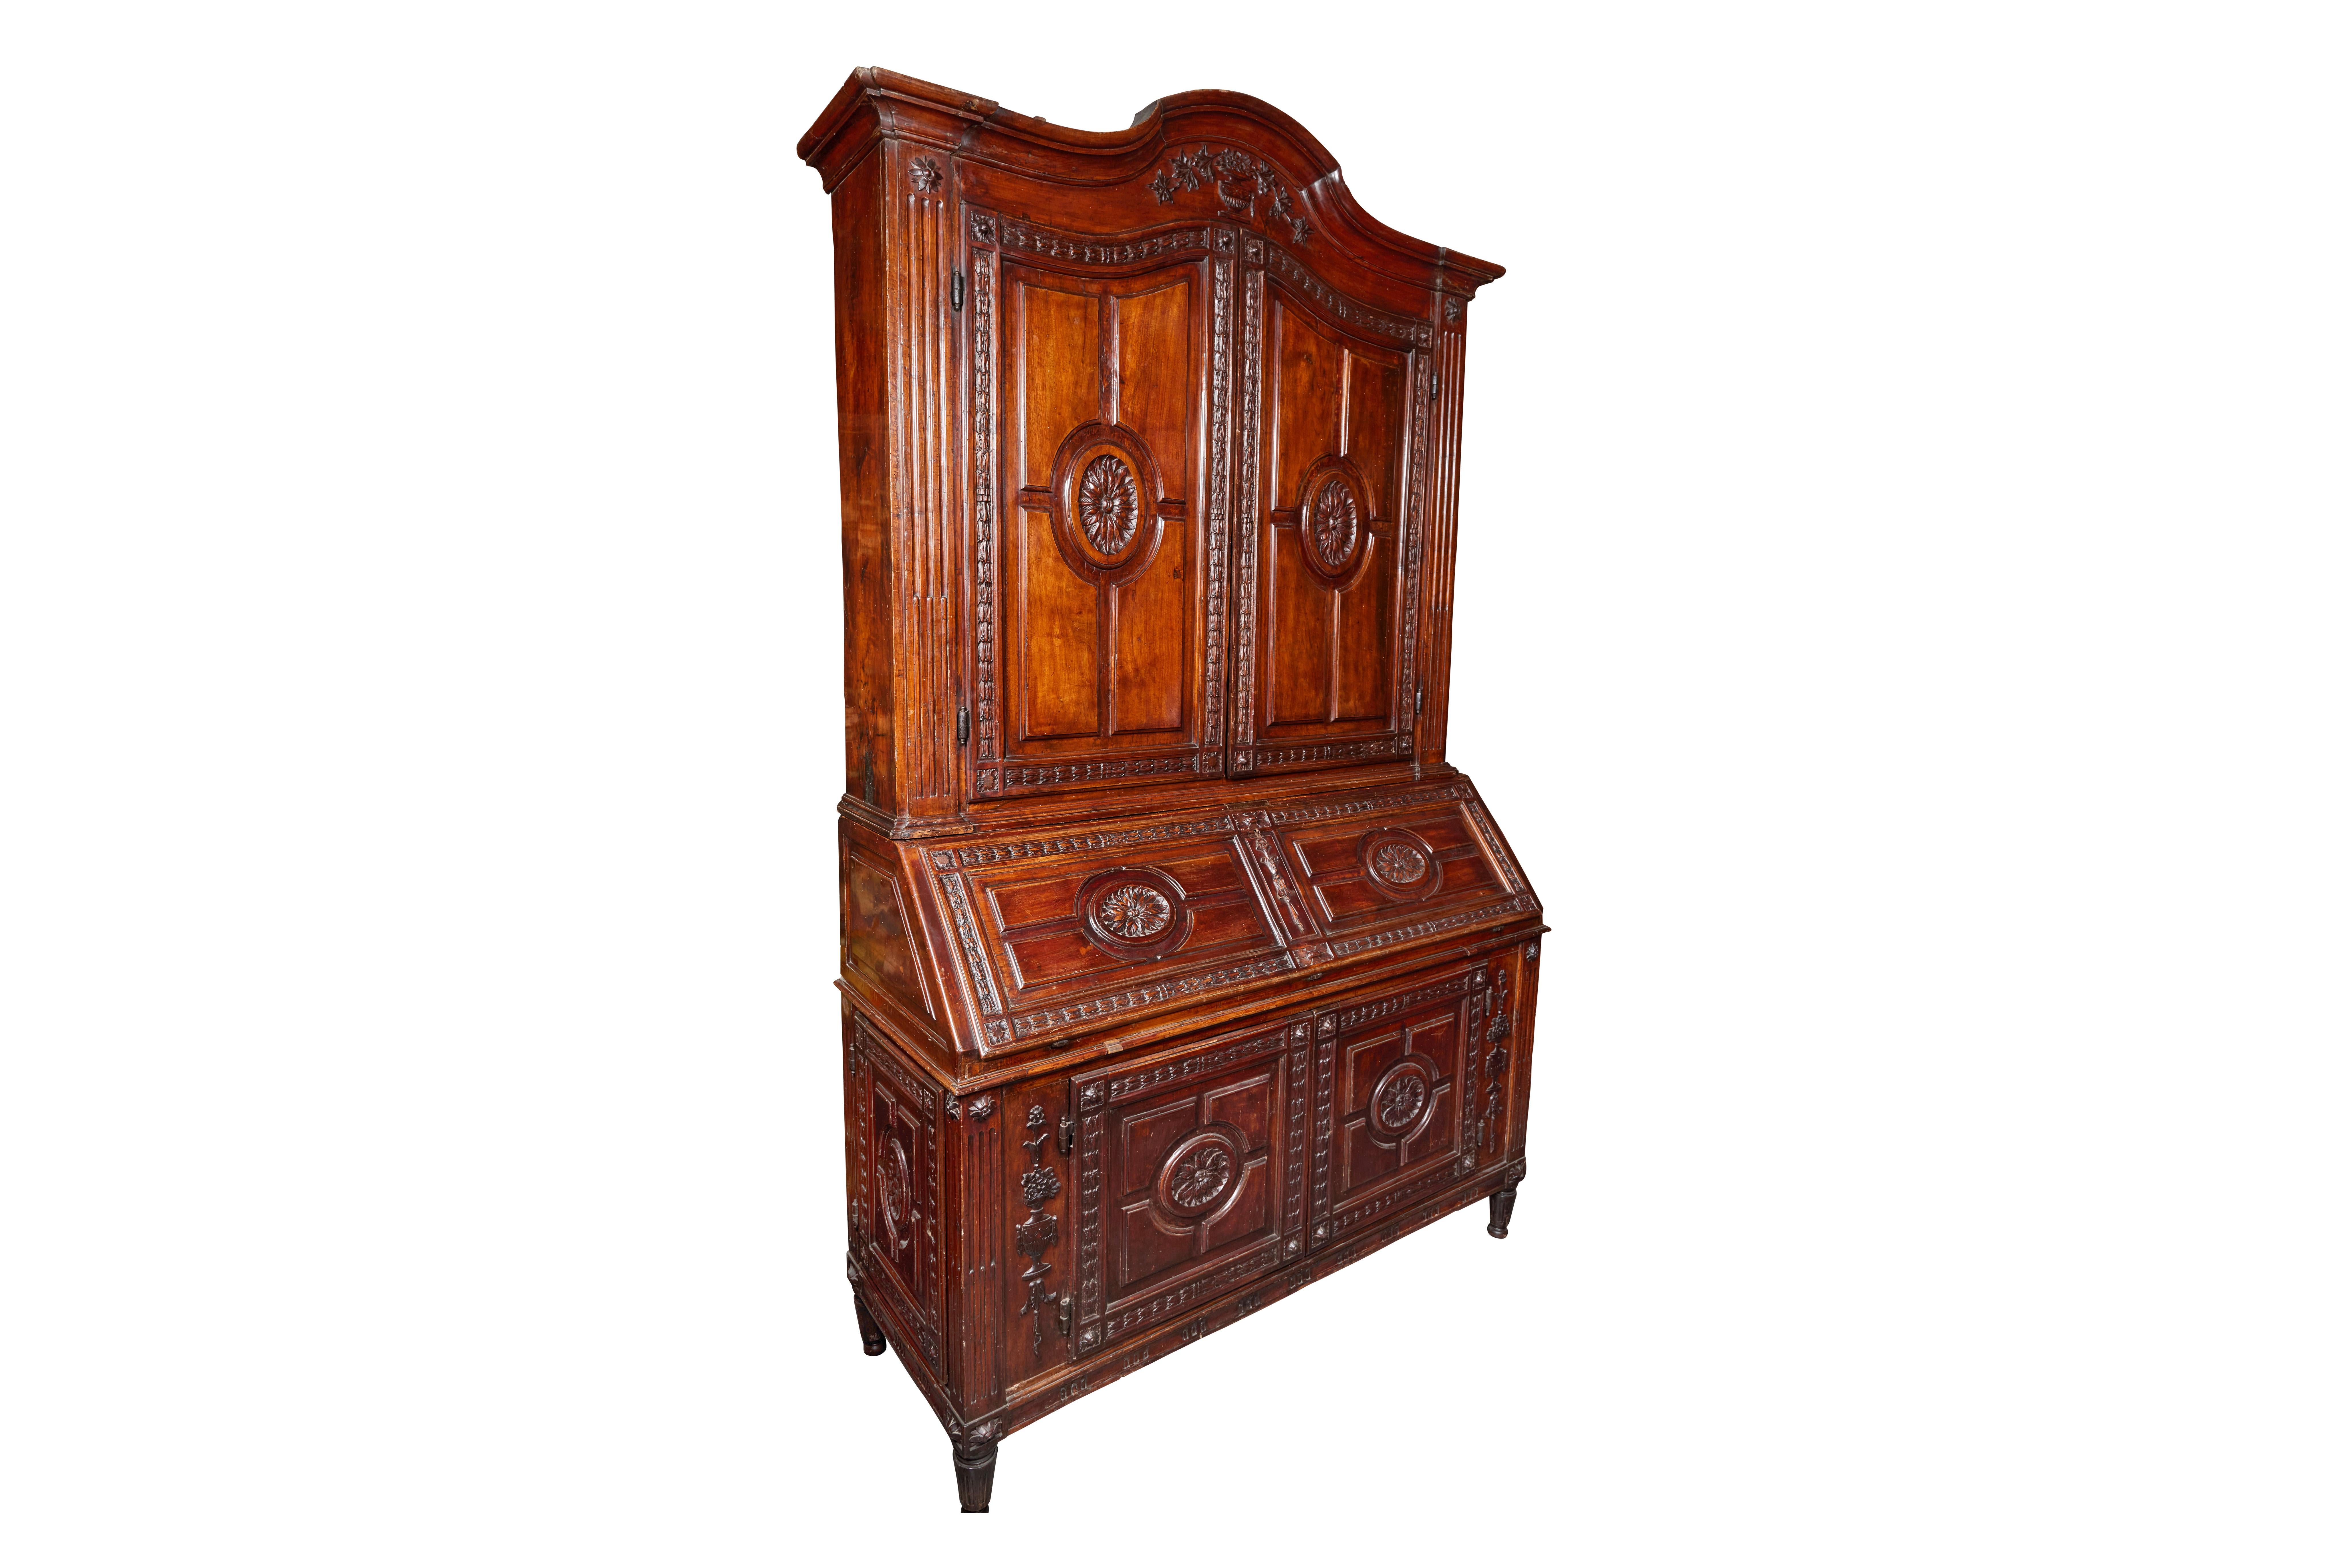 Stunning, c. 1820, solid walnut, two-tier, fall-front scriviana from the Piedmont district of Northern Italy. The paneled doors in the upper cabinet bordered by relief carved acanthus leaves surrounding a center medallion of blossoms. The lower half